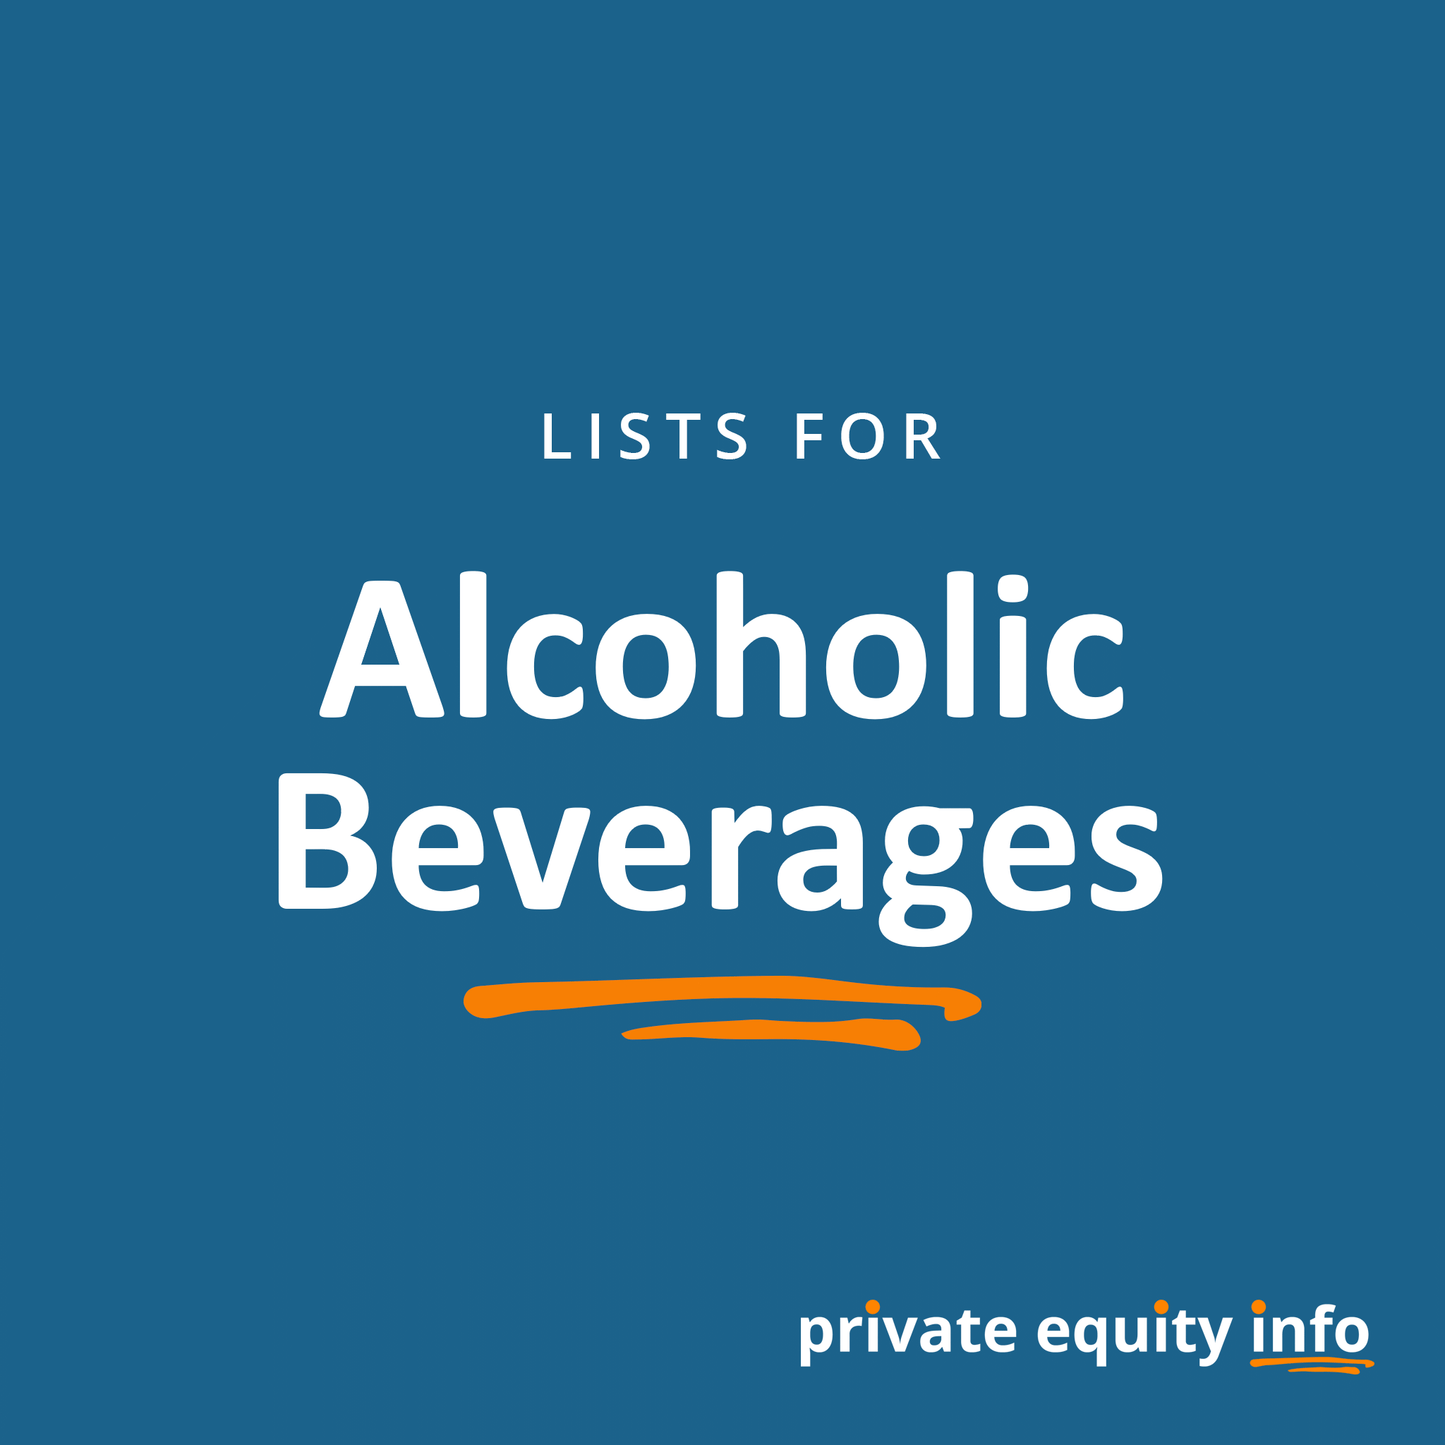 Top Private Equity Firms for the Alcohol Industry